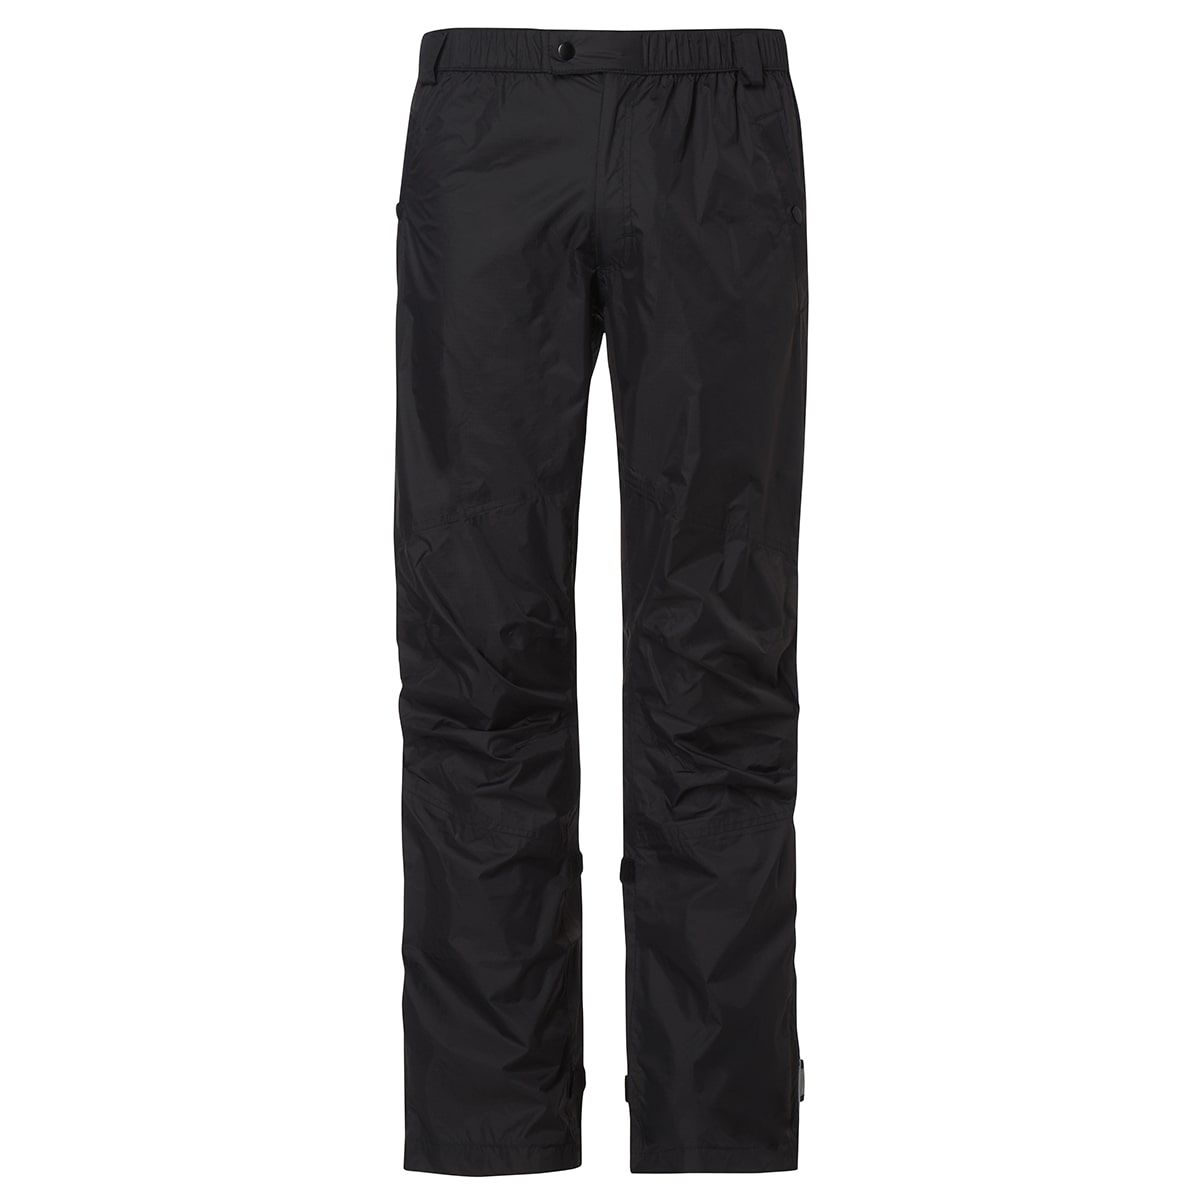 Loose Fit Waterproof Trekking Overtrousers  Craghoppers  MS